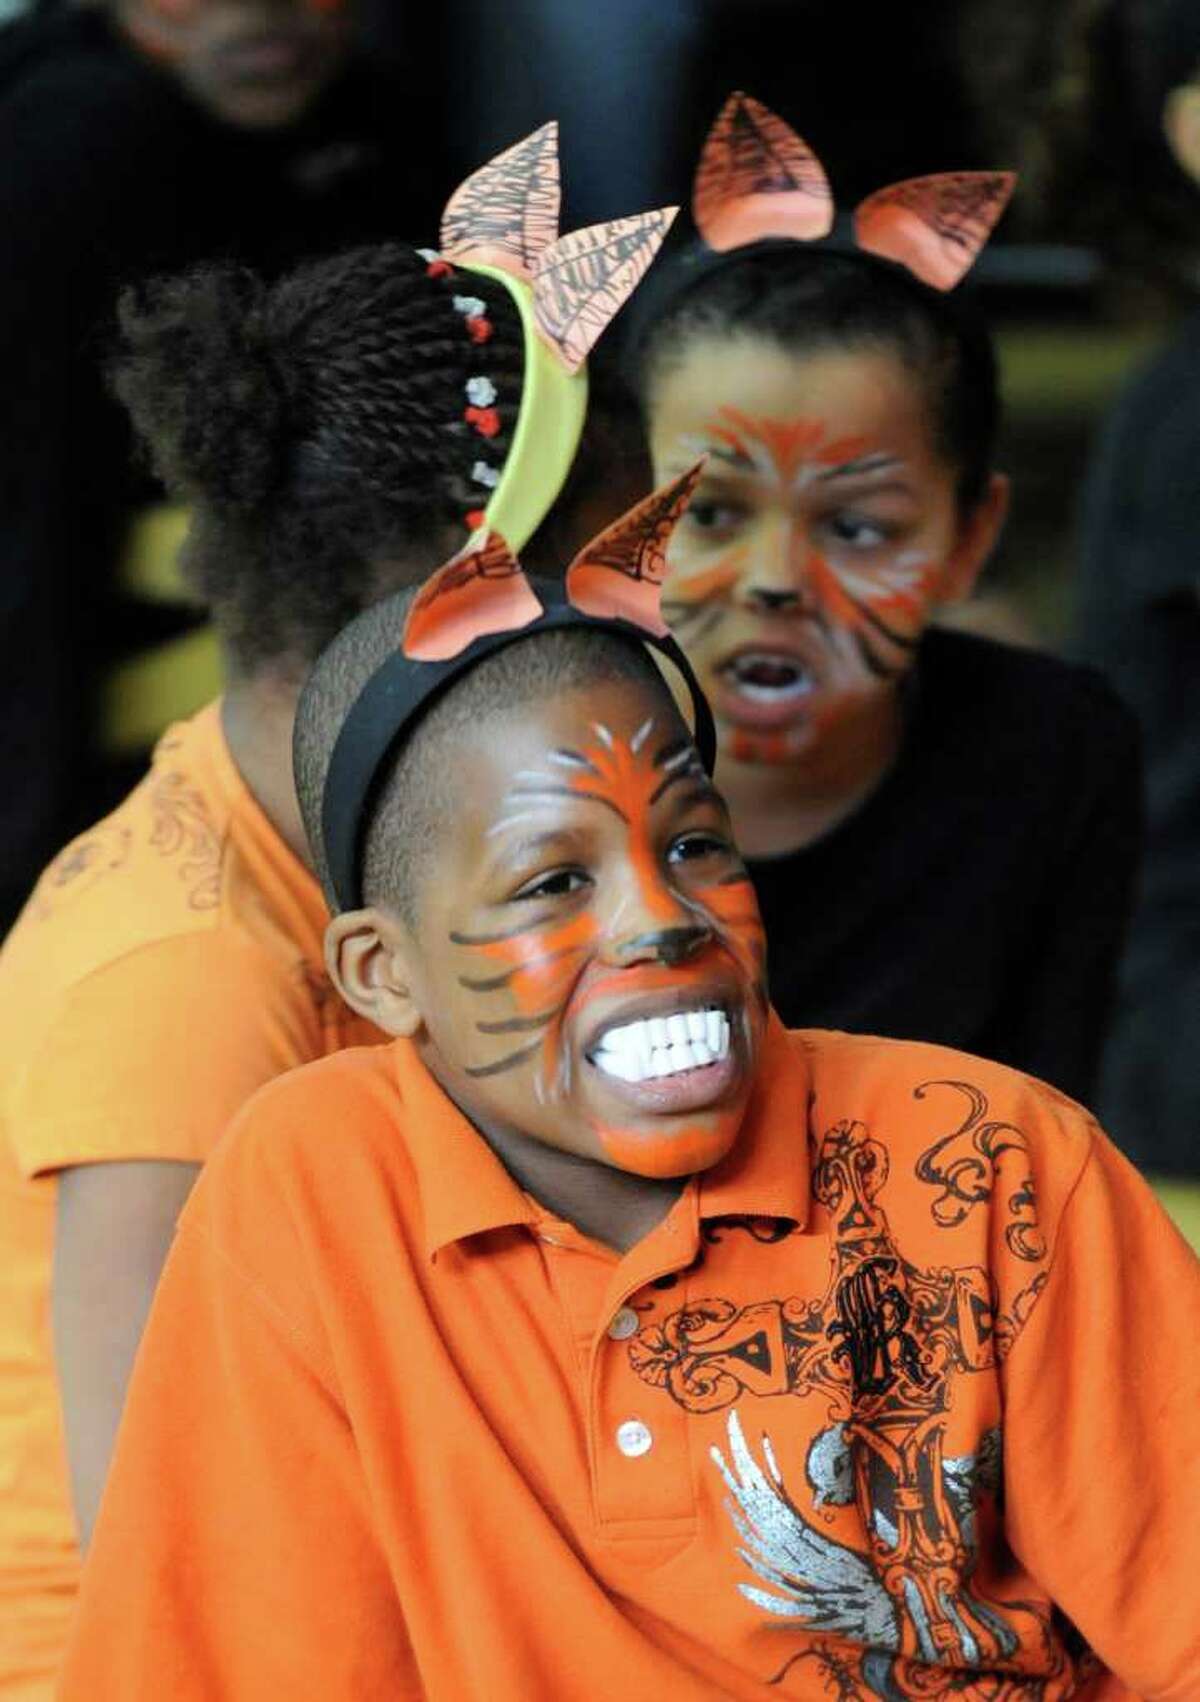 Tyler Caldwell shows off his "tiger" teeth as he joined other third graders from Troy School 2 during a performance of native dance of Nigeria February 16, 2011, as part of a program that studied the customs of the country in dance, storytelling and art under the supervision of The Arts Center of the Capital Region with a grant from First Niagara Bank. (Skip Dickstein / Times Union)